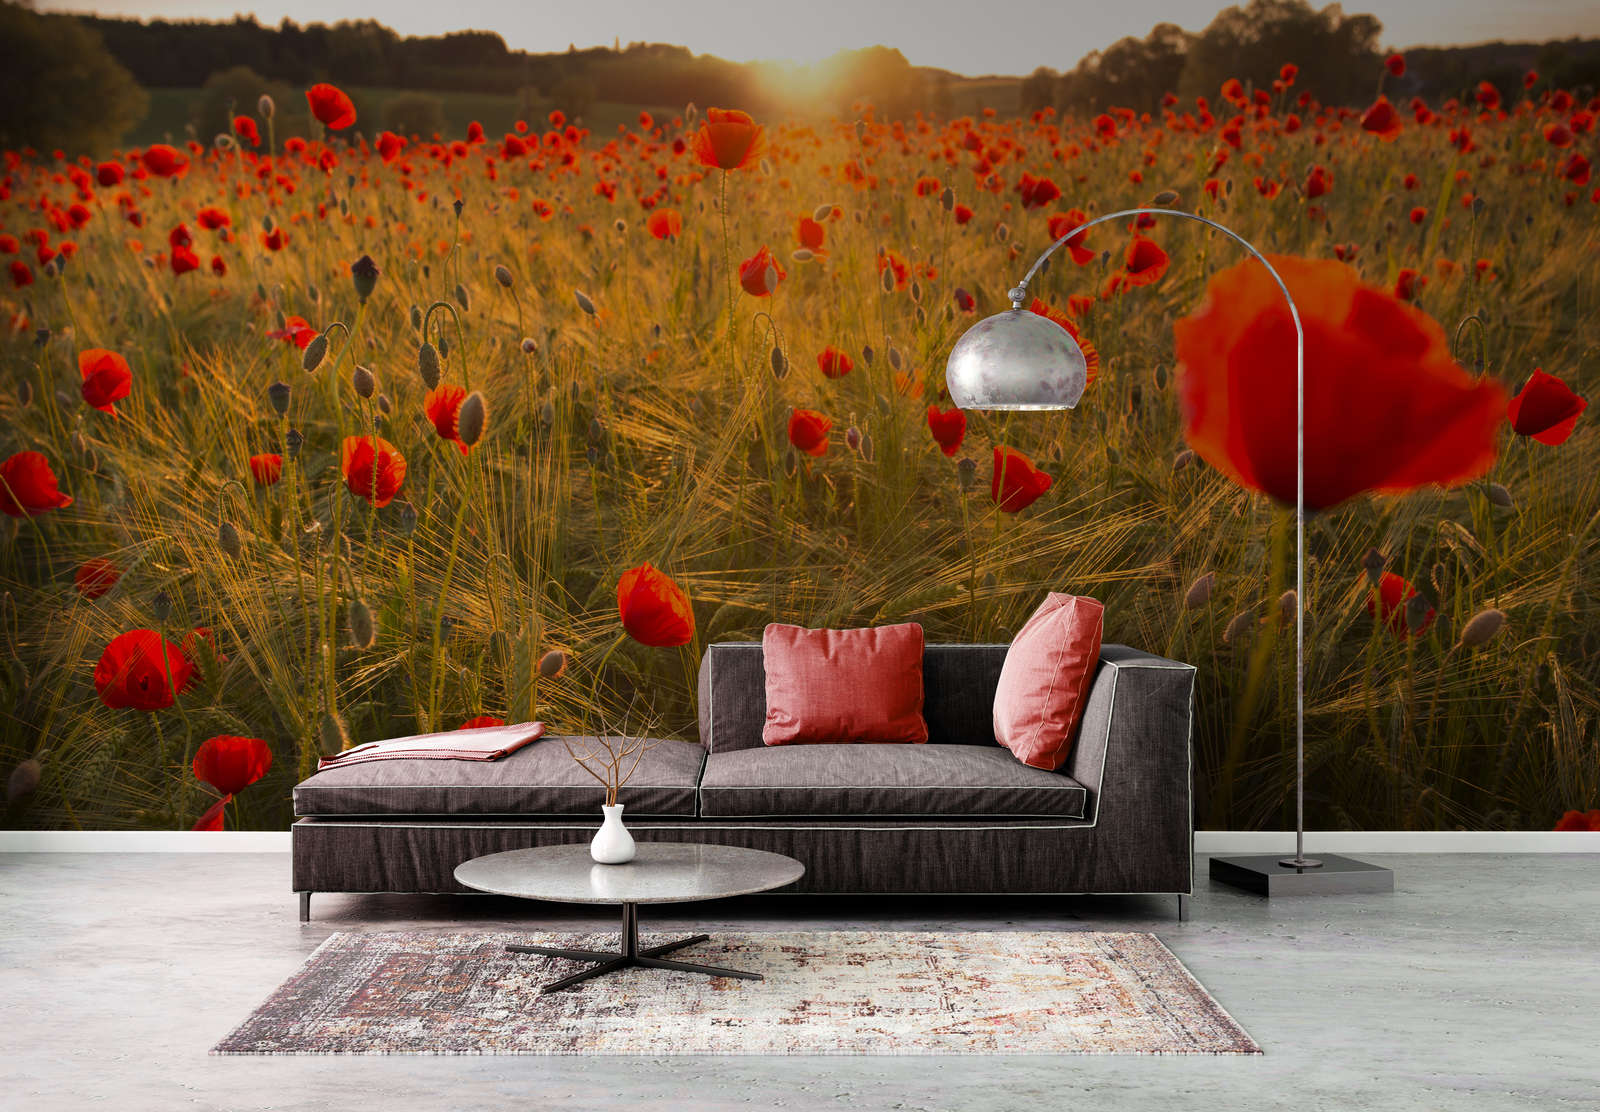             Plants mural red flower meadow on matt smooth non-woven
        